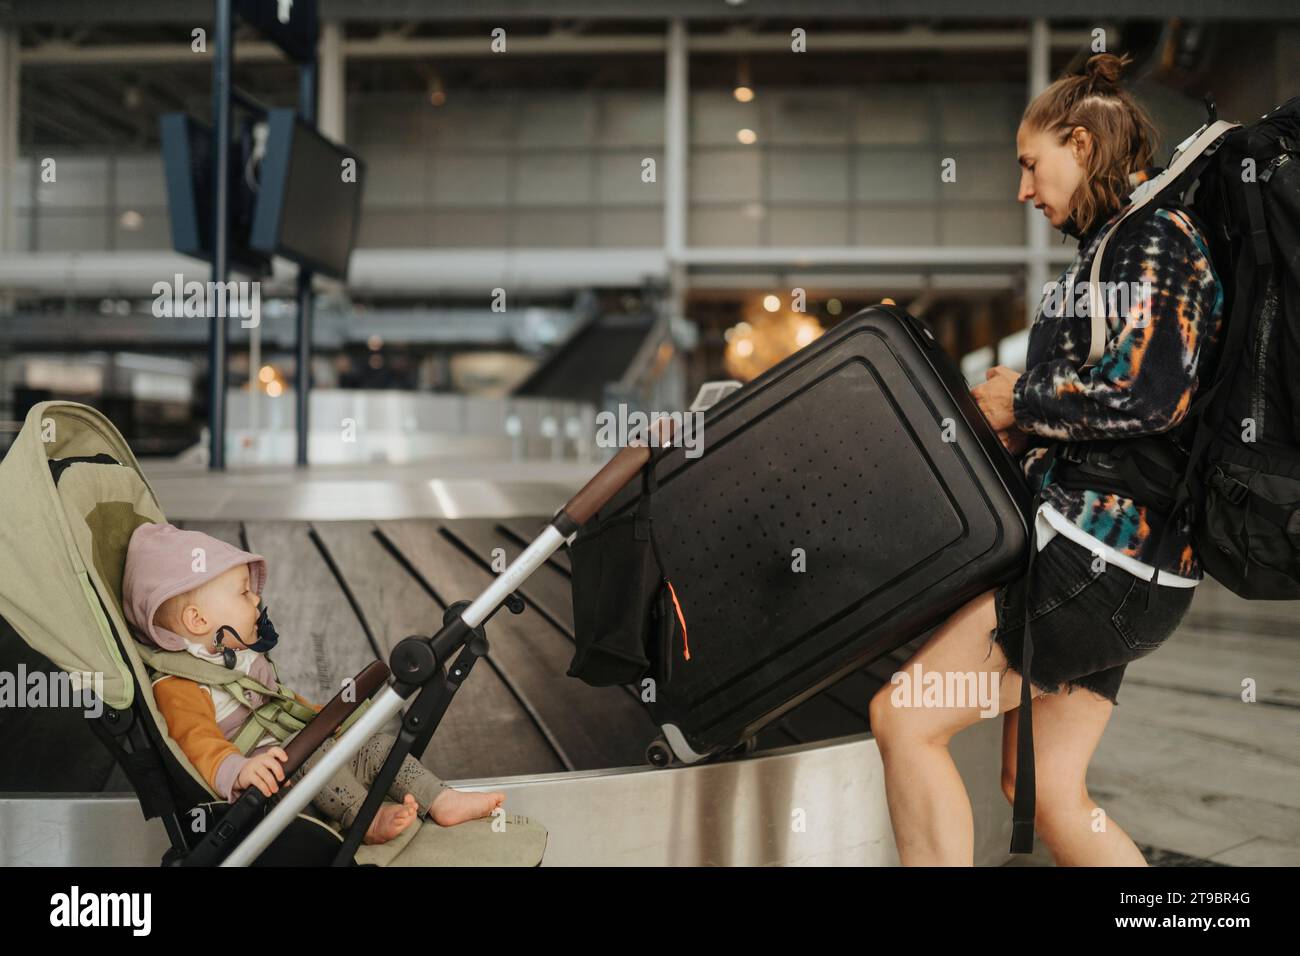 Mother with baby collecting luggage at airport Stock Photo